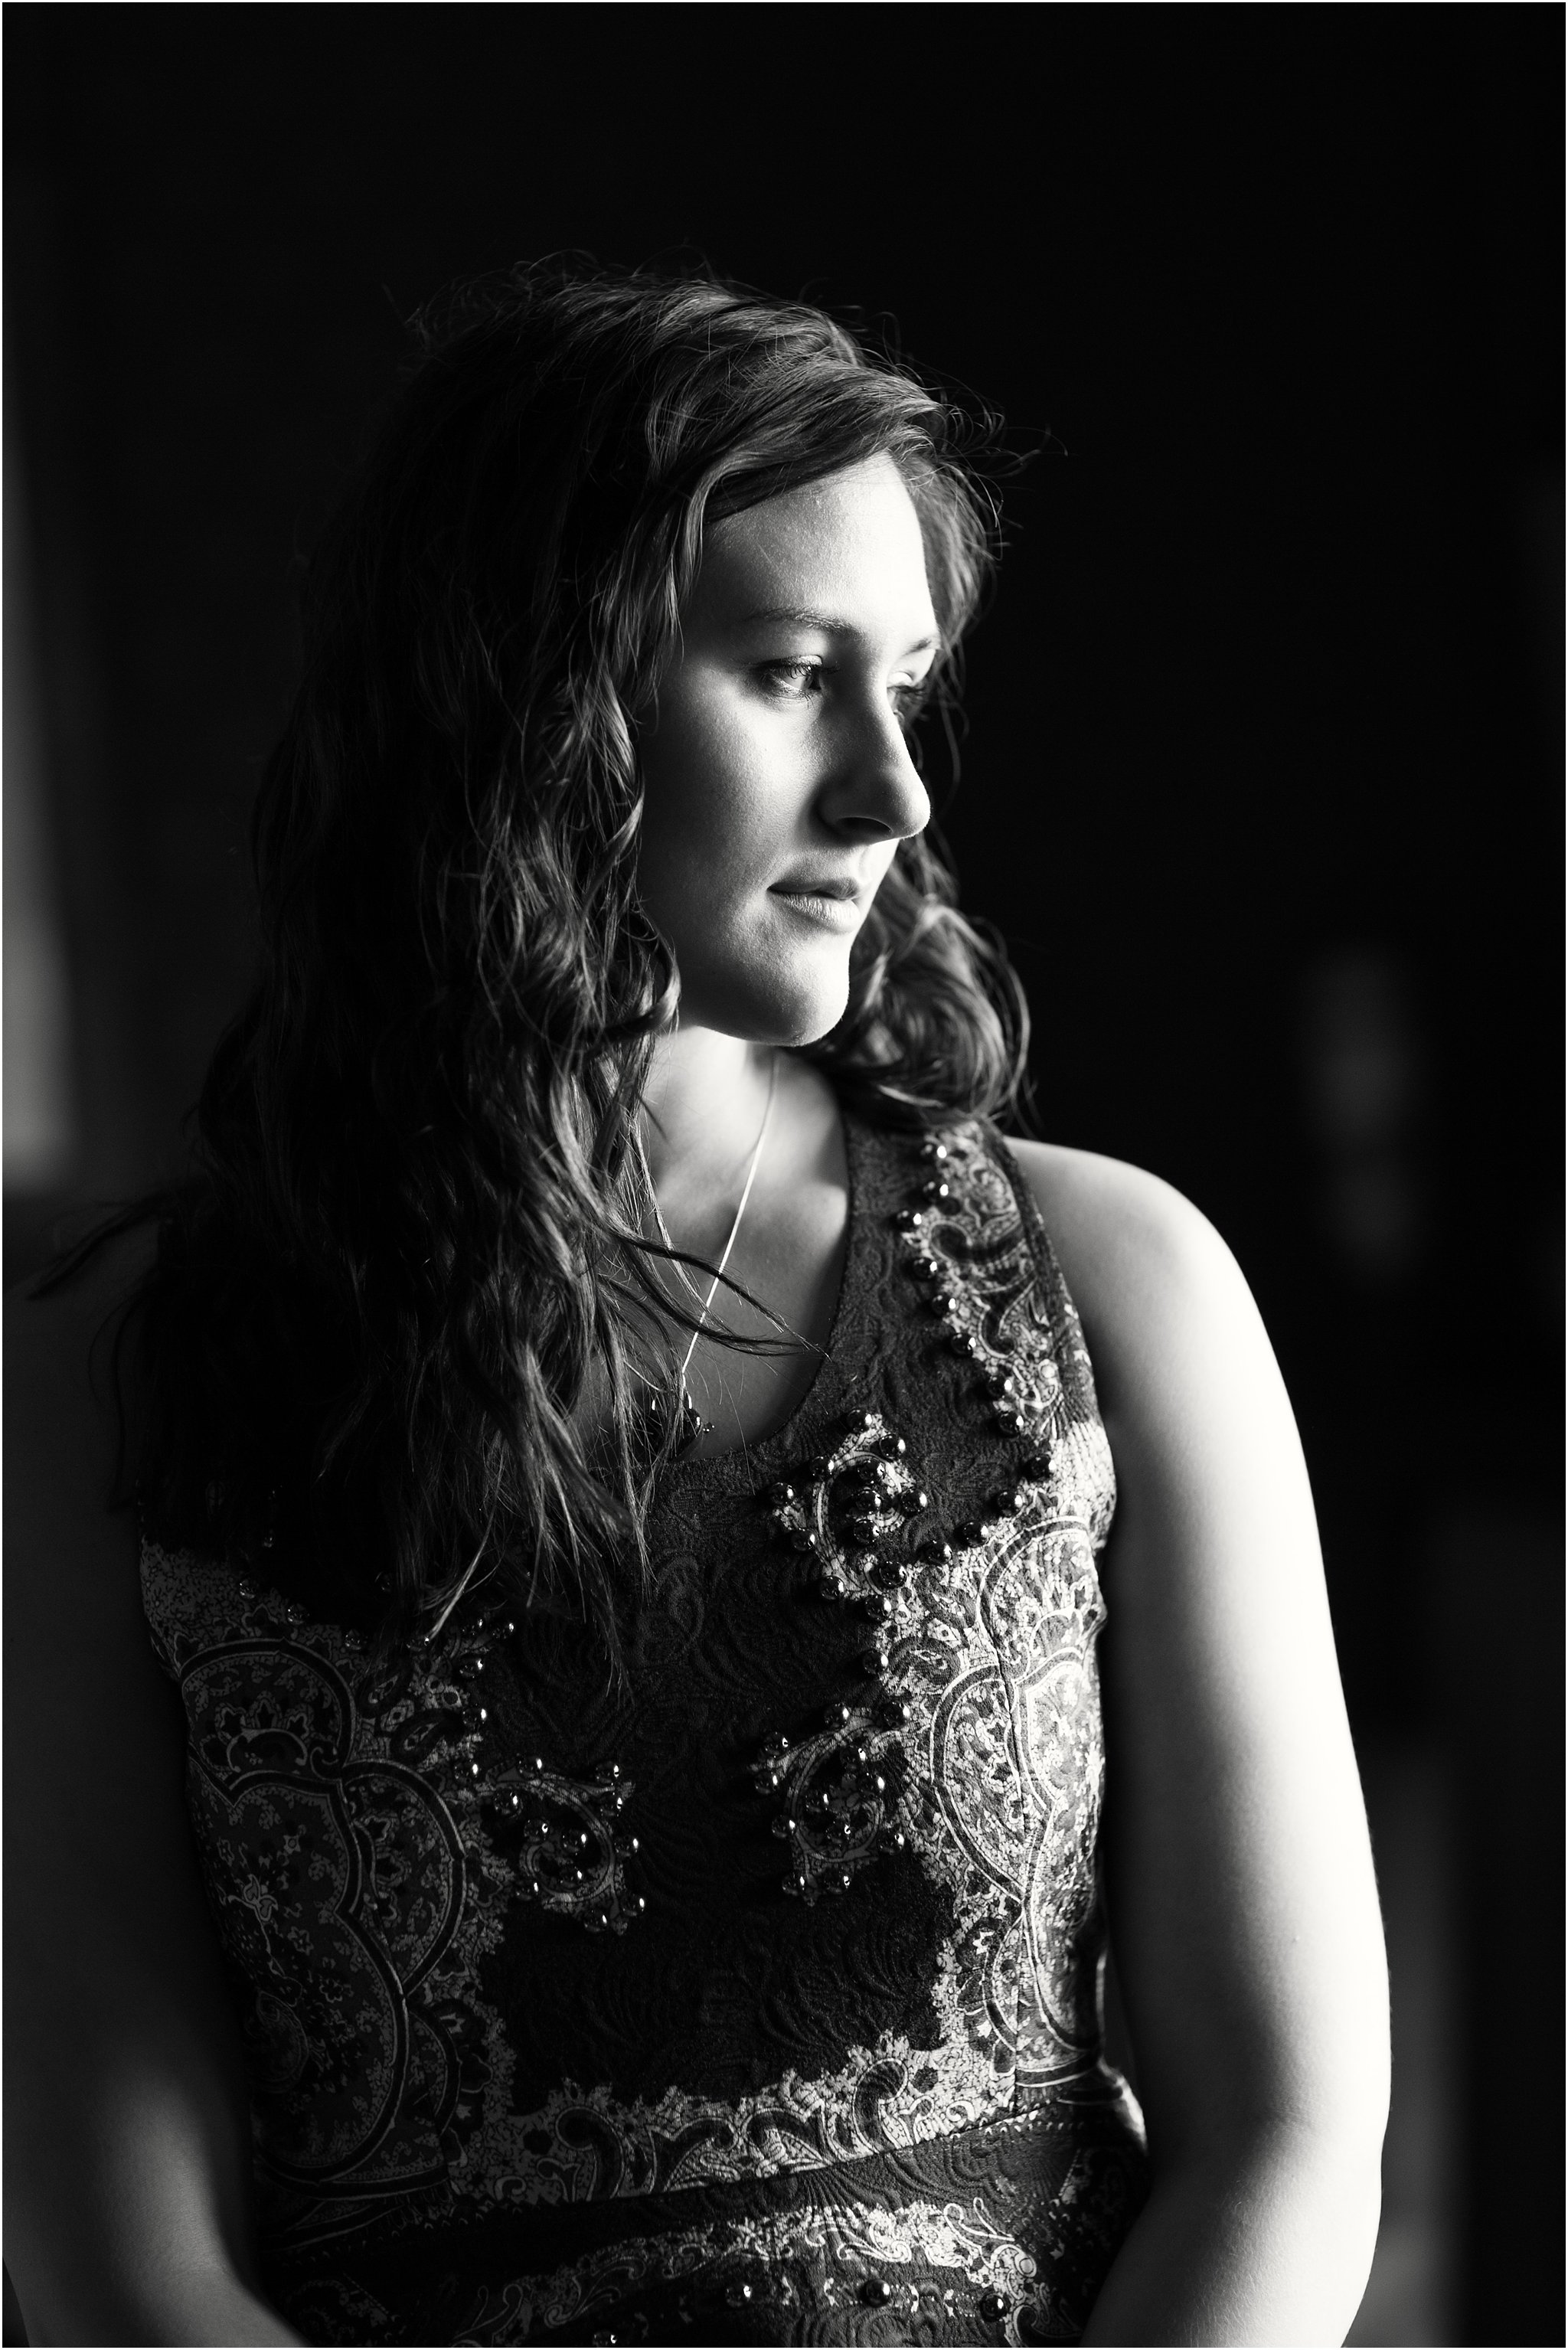 Black and White Portrait of Bride-to-Be